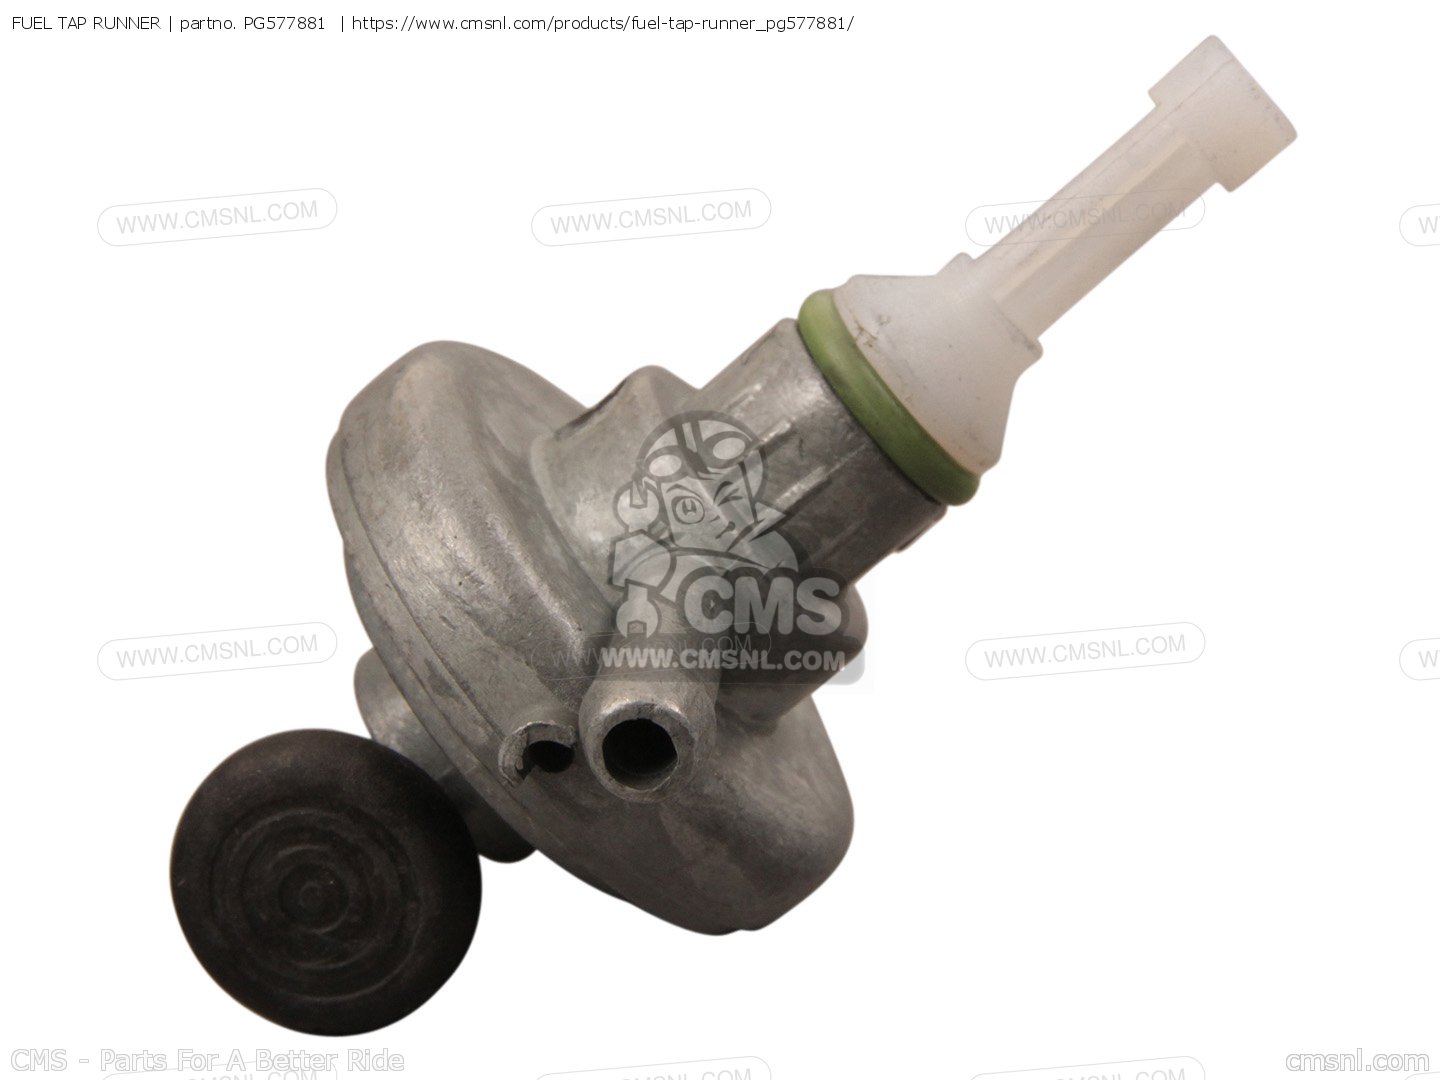 PG577881: Fuel Tap Runner Piaggio Group - buy the 577881 at CMSNL